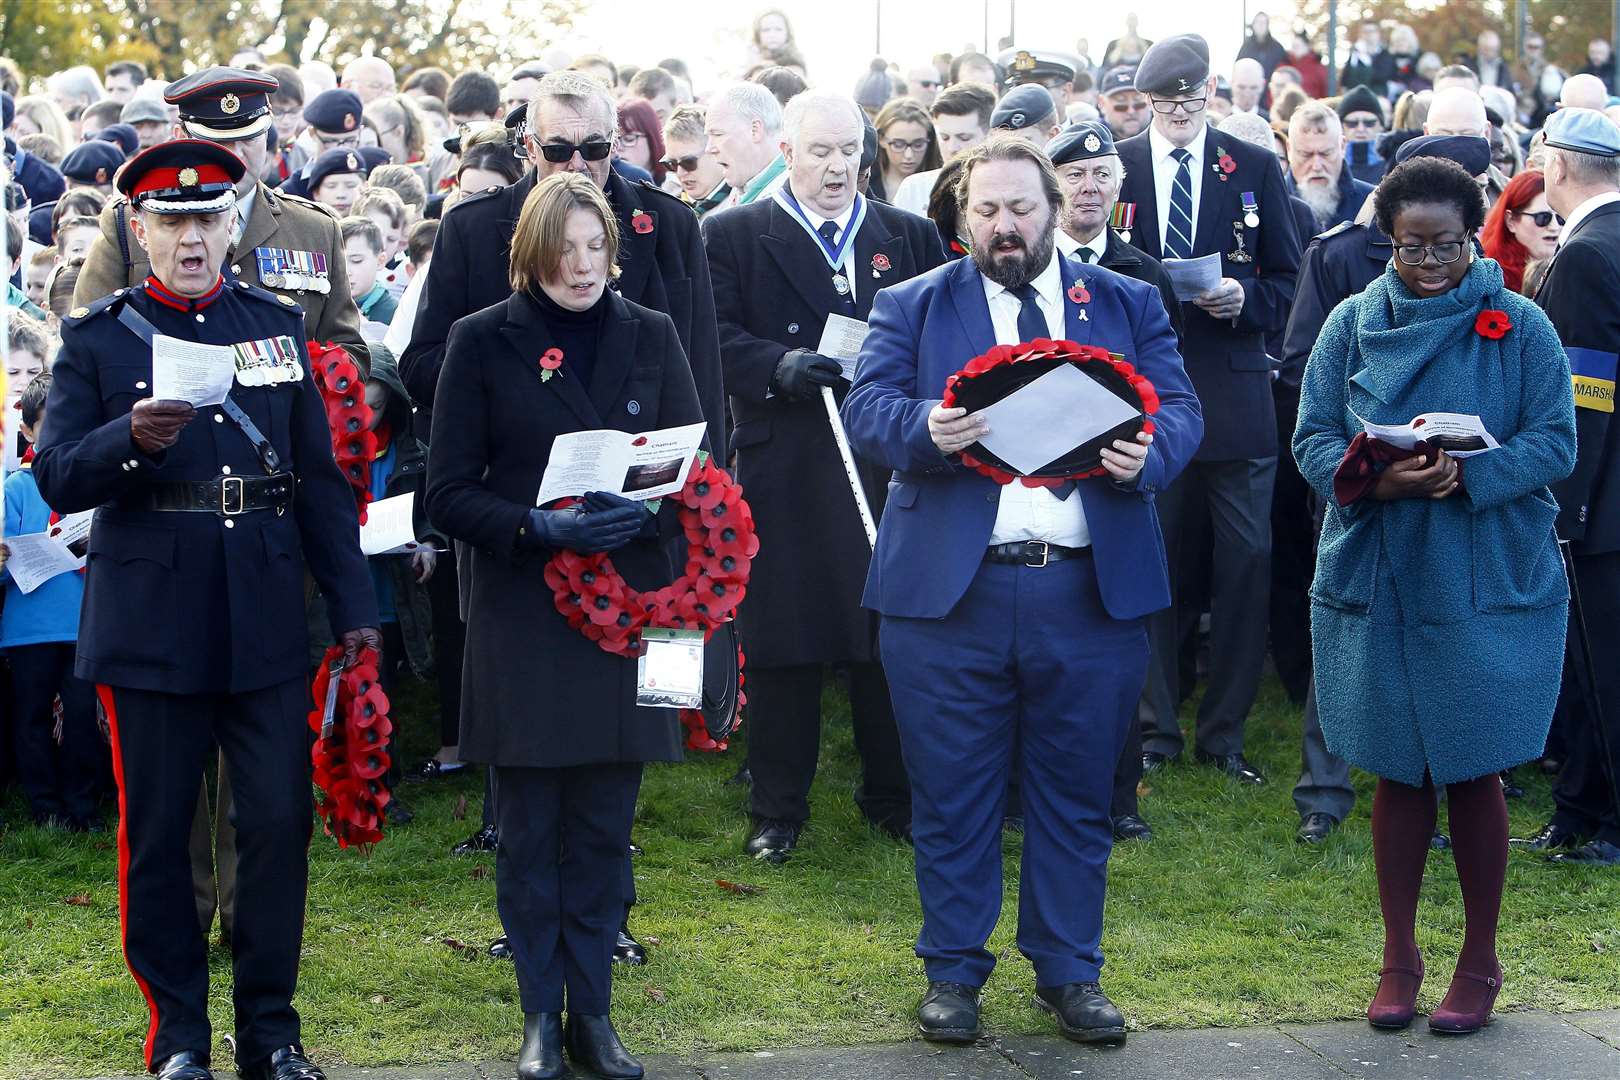 Local MP, councillors and other dignatories pay their respects during a Chatham Remembrance Service held at Victoria Gardens. From left to right: Dep Lt of Kent Peter Gilbert, Tracey Crouch MP, Cllr Vince Maple and Cllr Siju Adeoye. Picture: Sean Aidan (21302951)